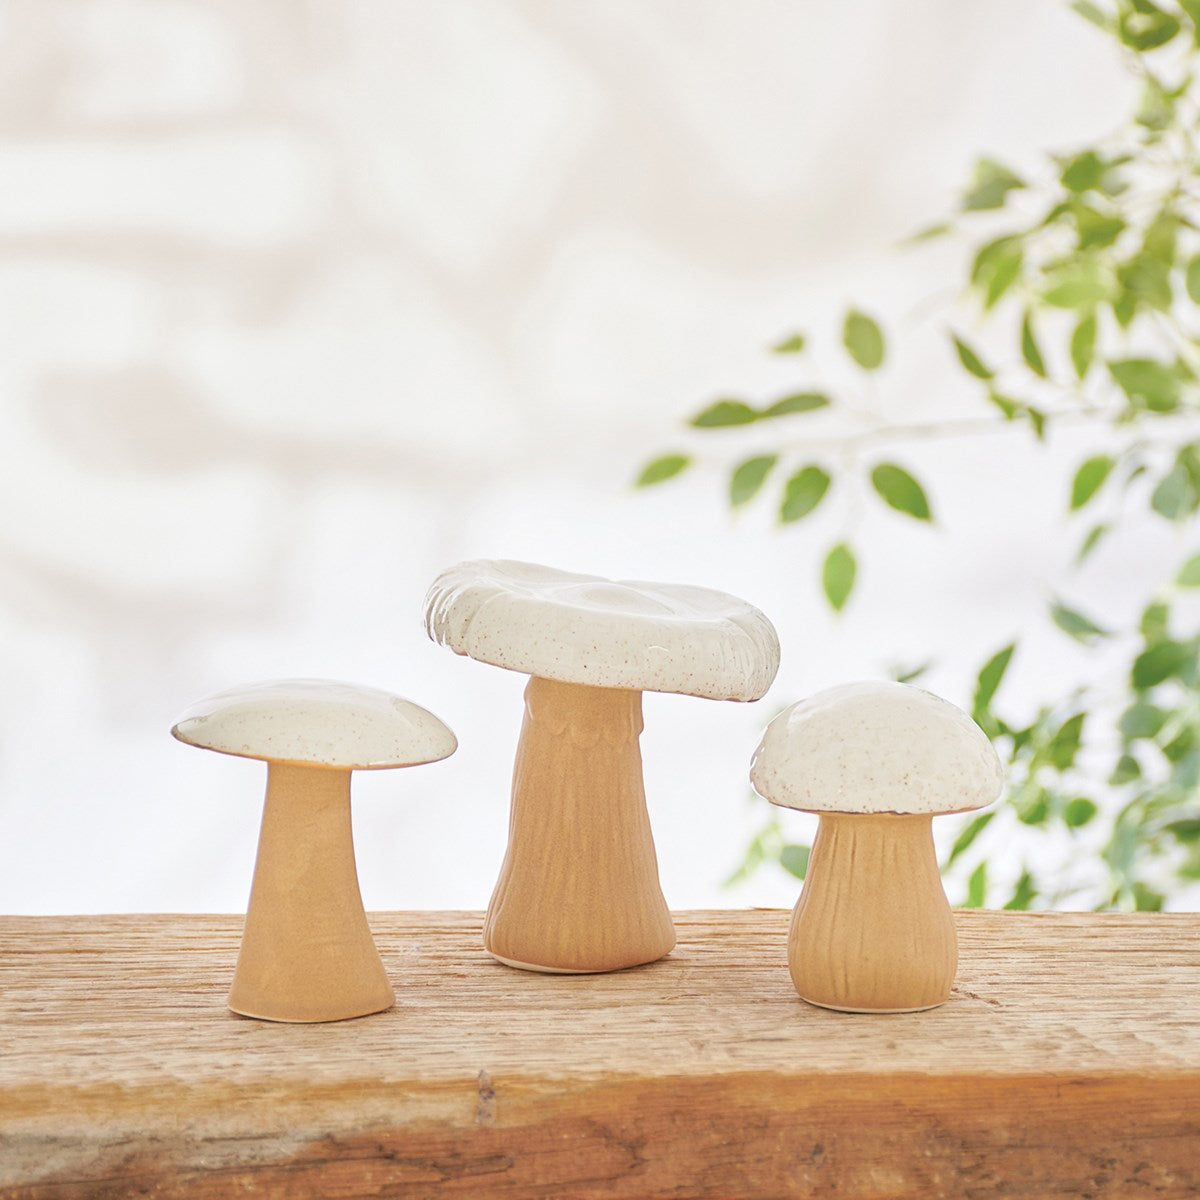 all three sizes of wild mushrooms have a white top and tan stem displayed on a rustic cut log with a shrub in the background